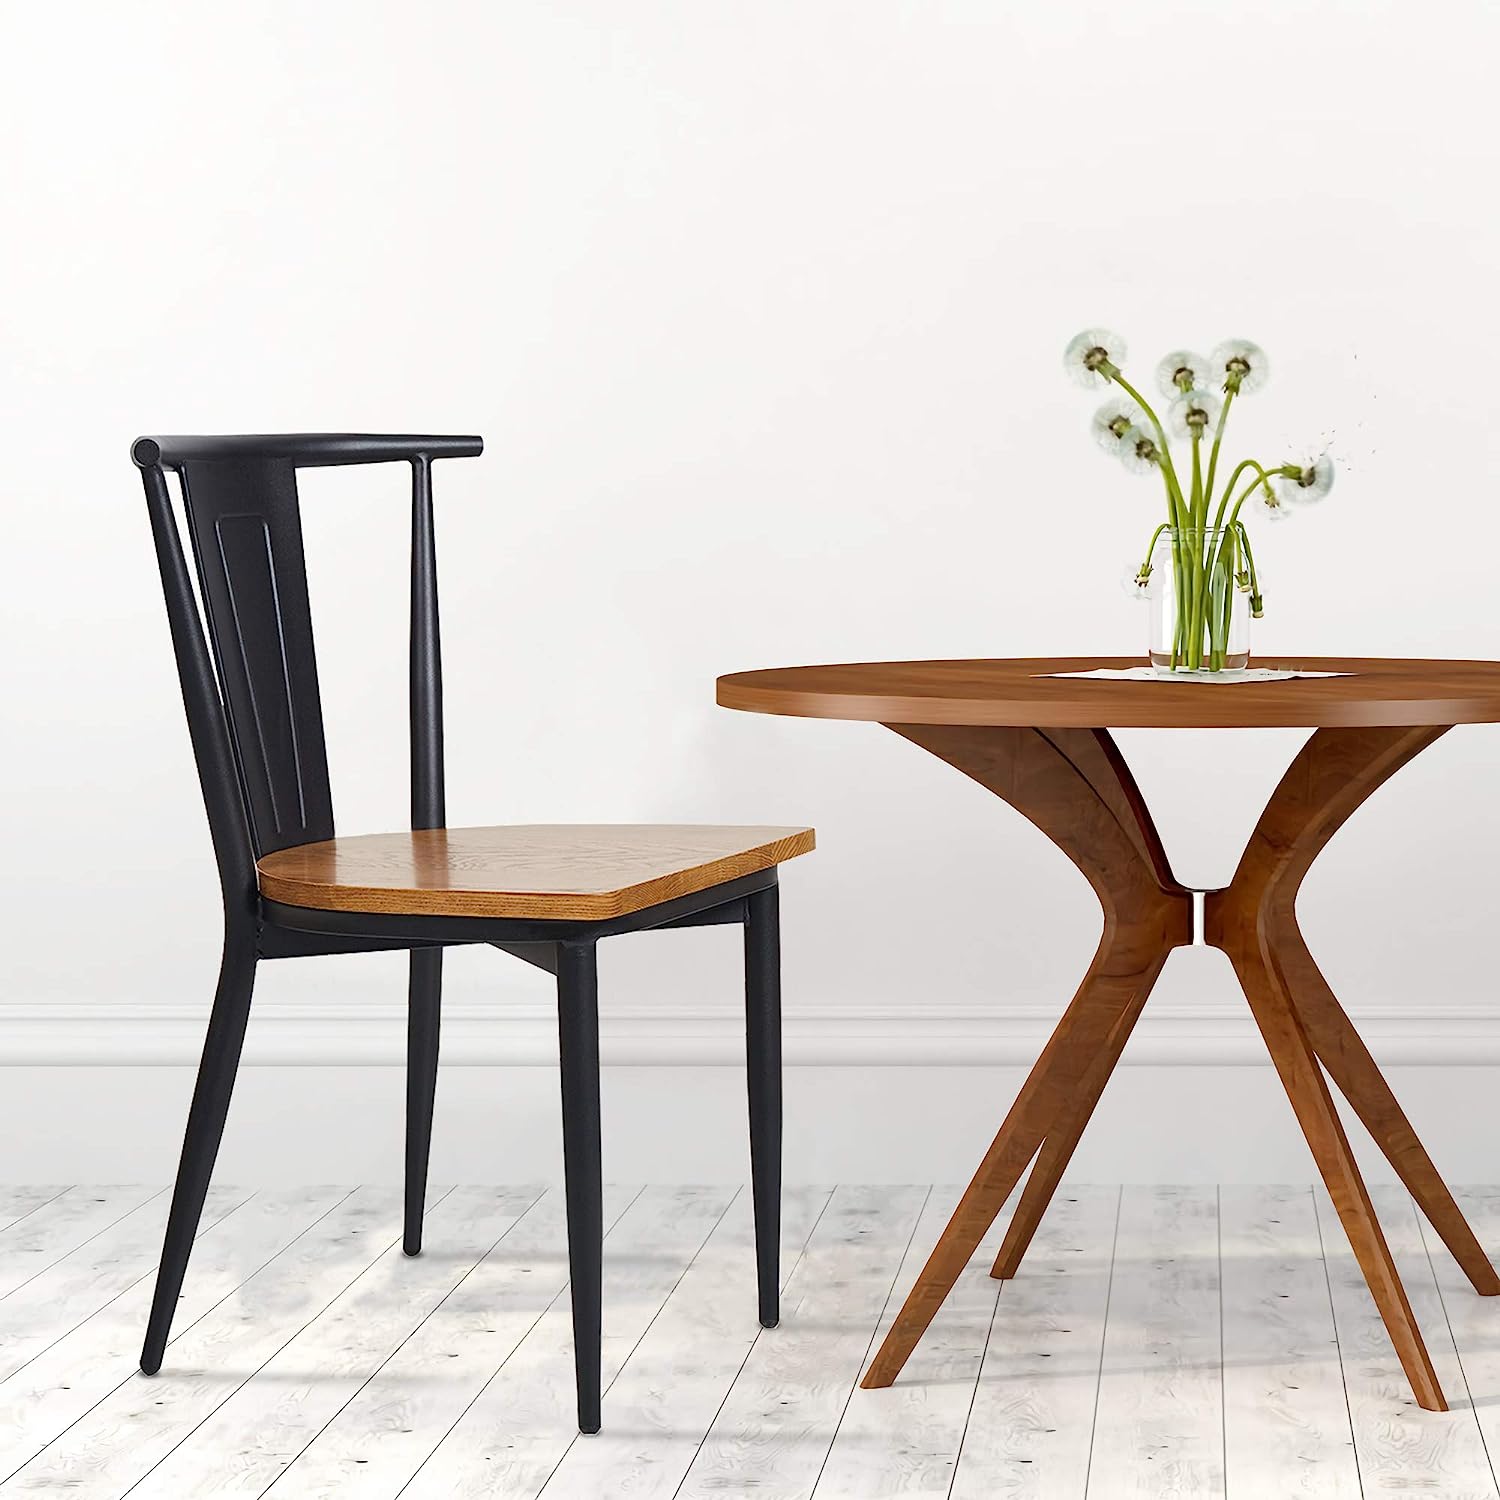 LUCKYERMORE Set of 2 Dining Chairs Seating with Back, Wood Seat & Metal Frame Restaurant Chairs